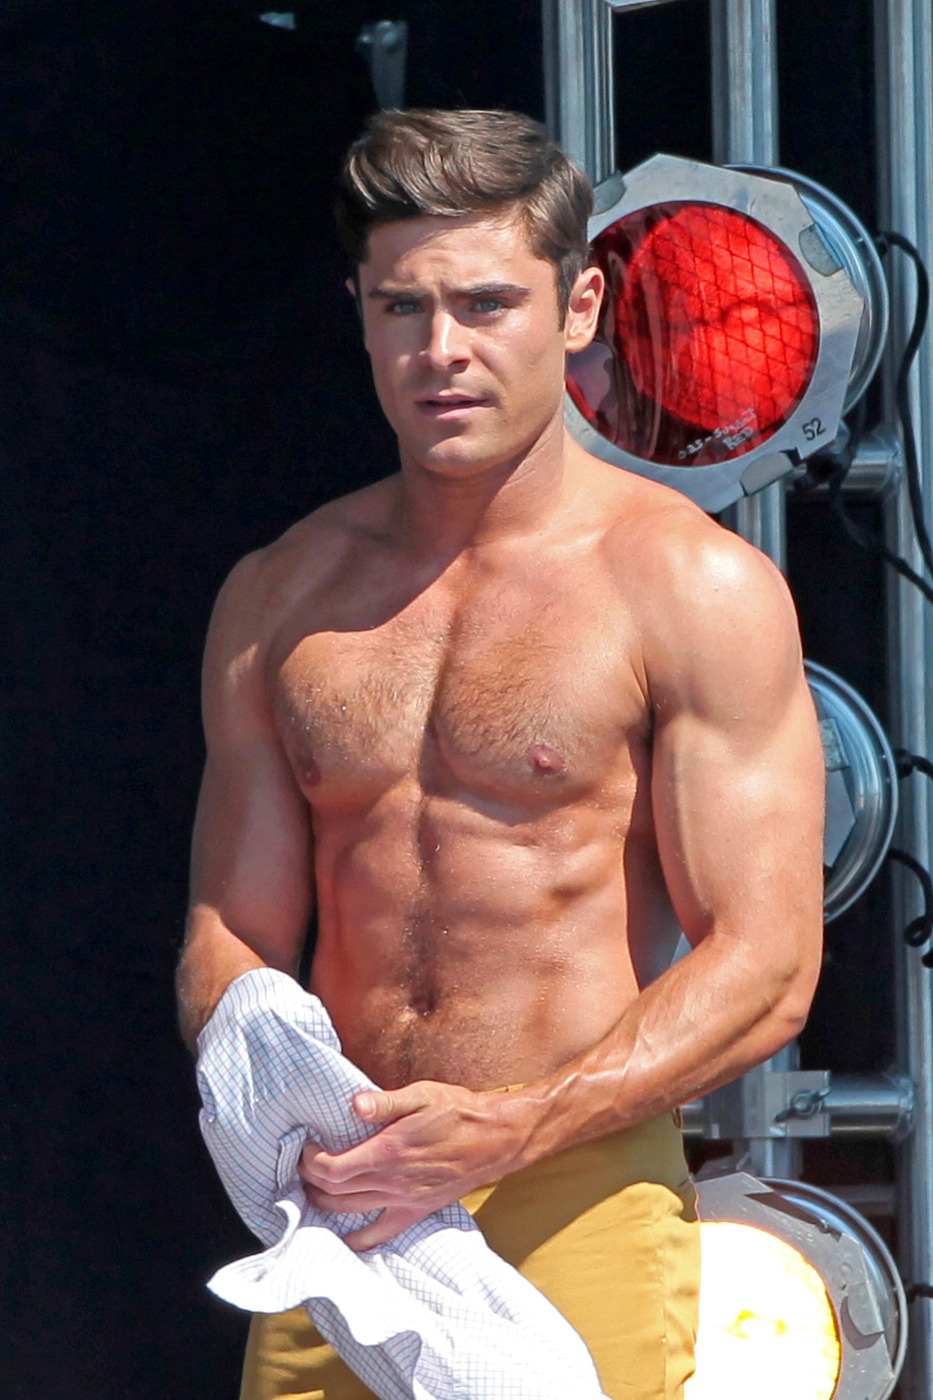 What is the likelihood zac efron used steroids to get jacked for the new baywatch